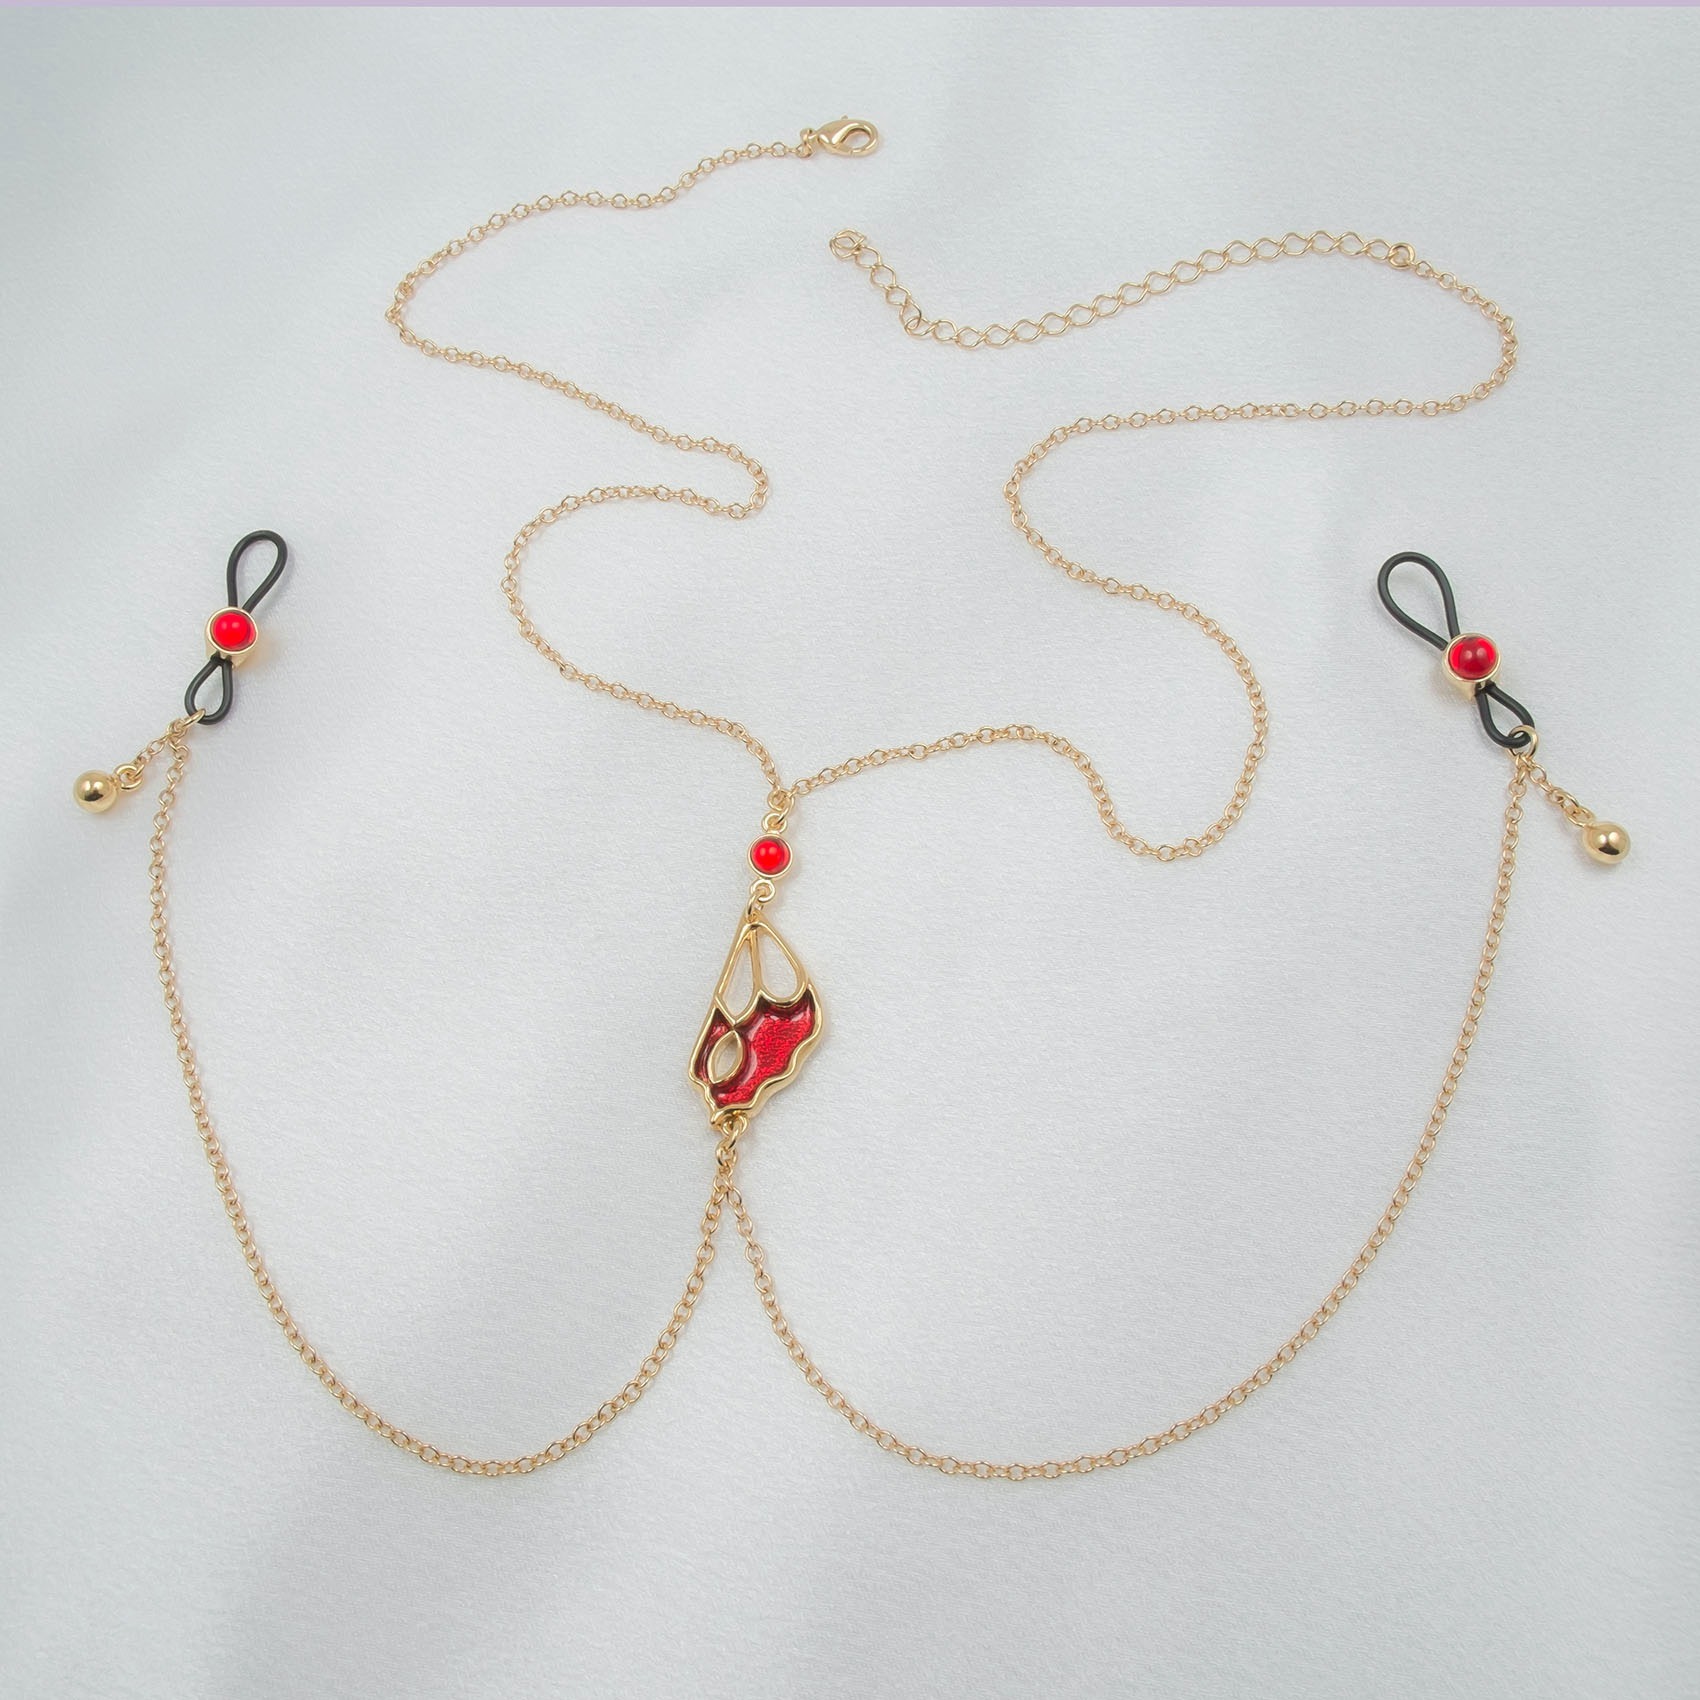 jewel-intimate-breasts-naked-necklace-gold-red